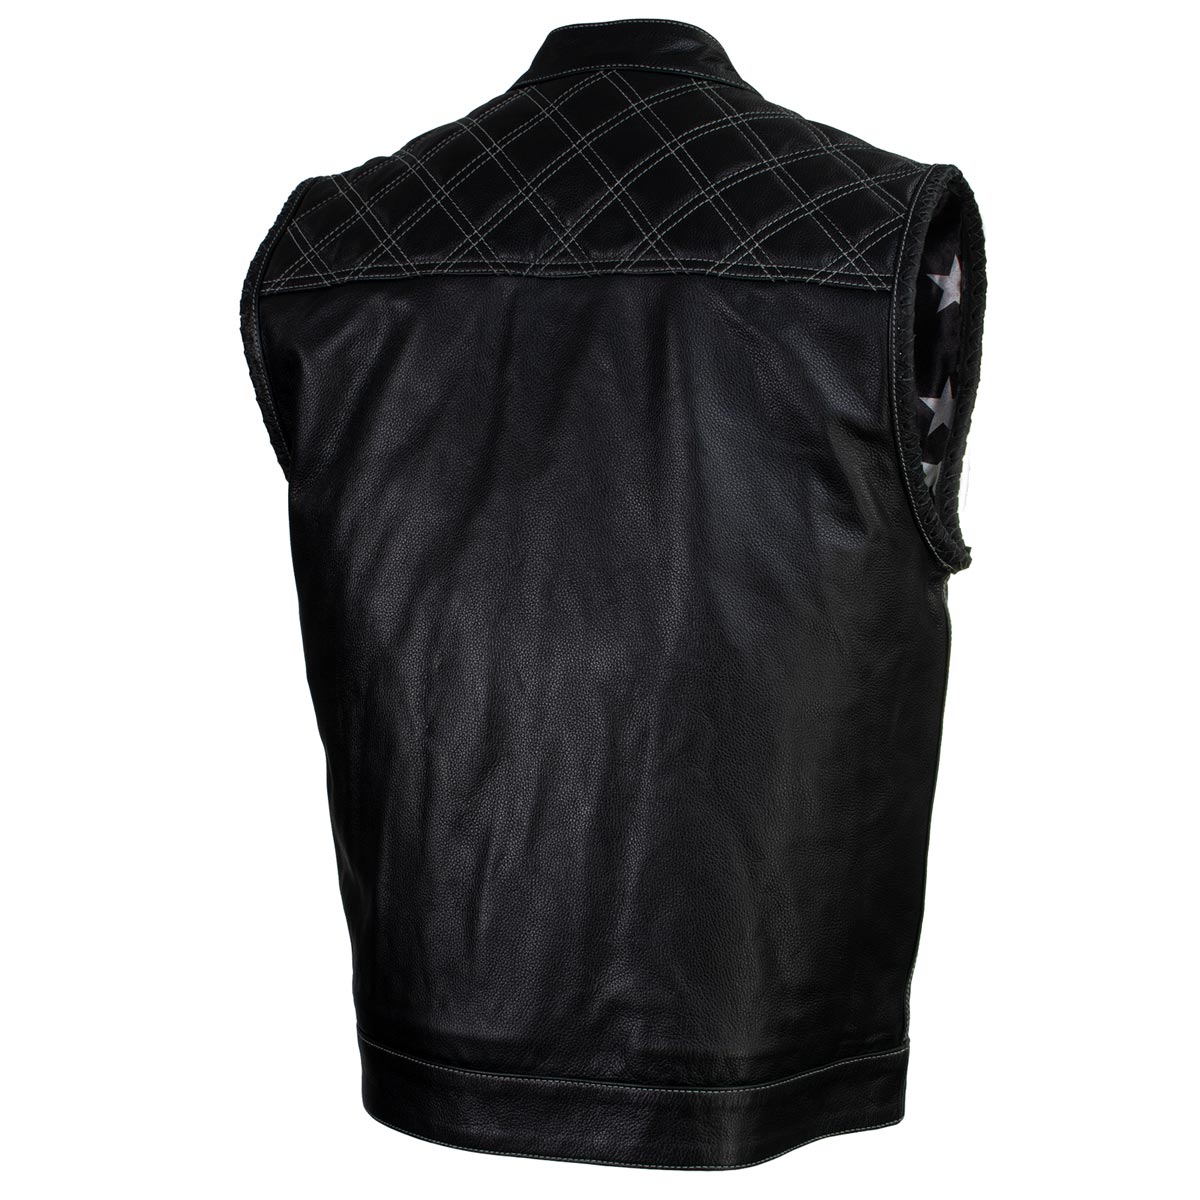 Xelement XS13003 Men's Black 'Stars and Stripes’ Leather Motorcycle Vest with USA Flag Liner